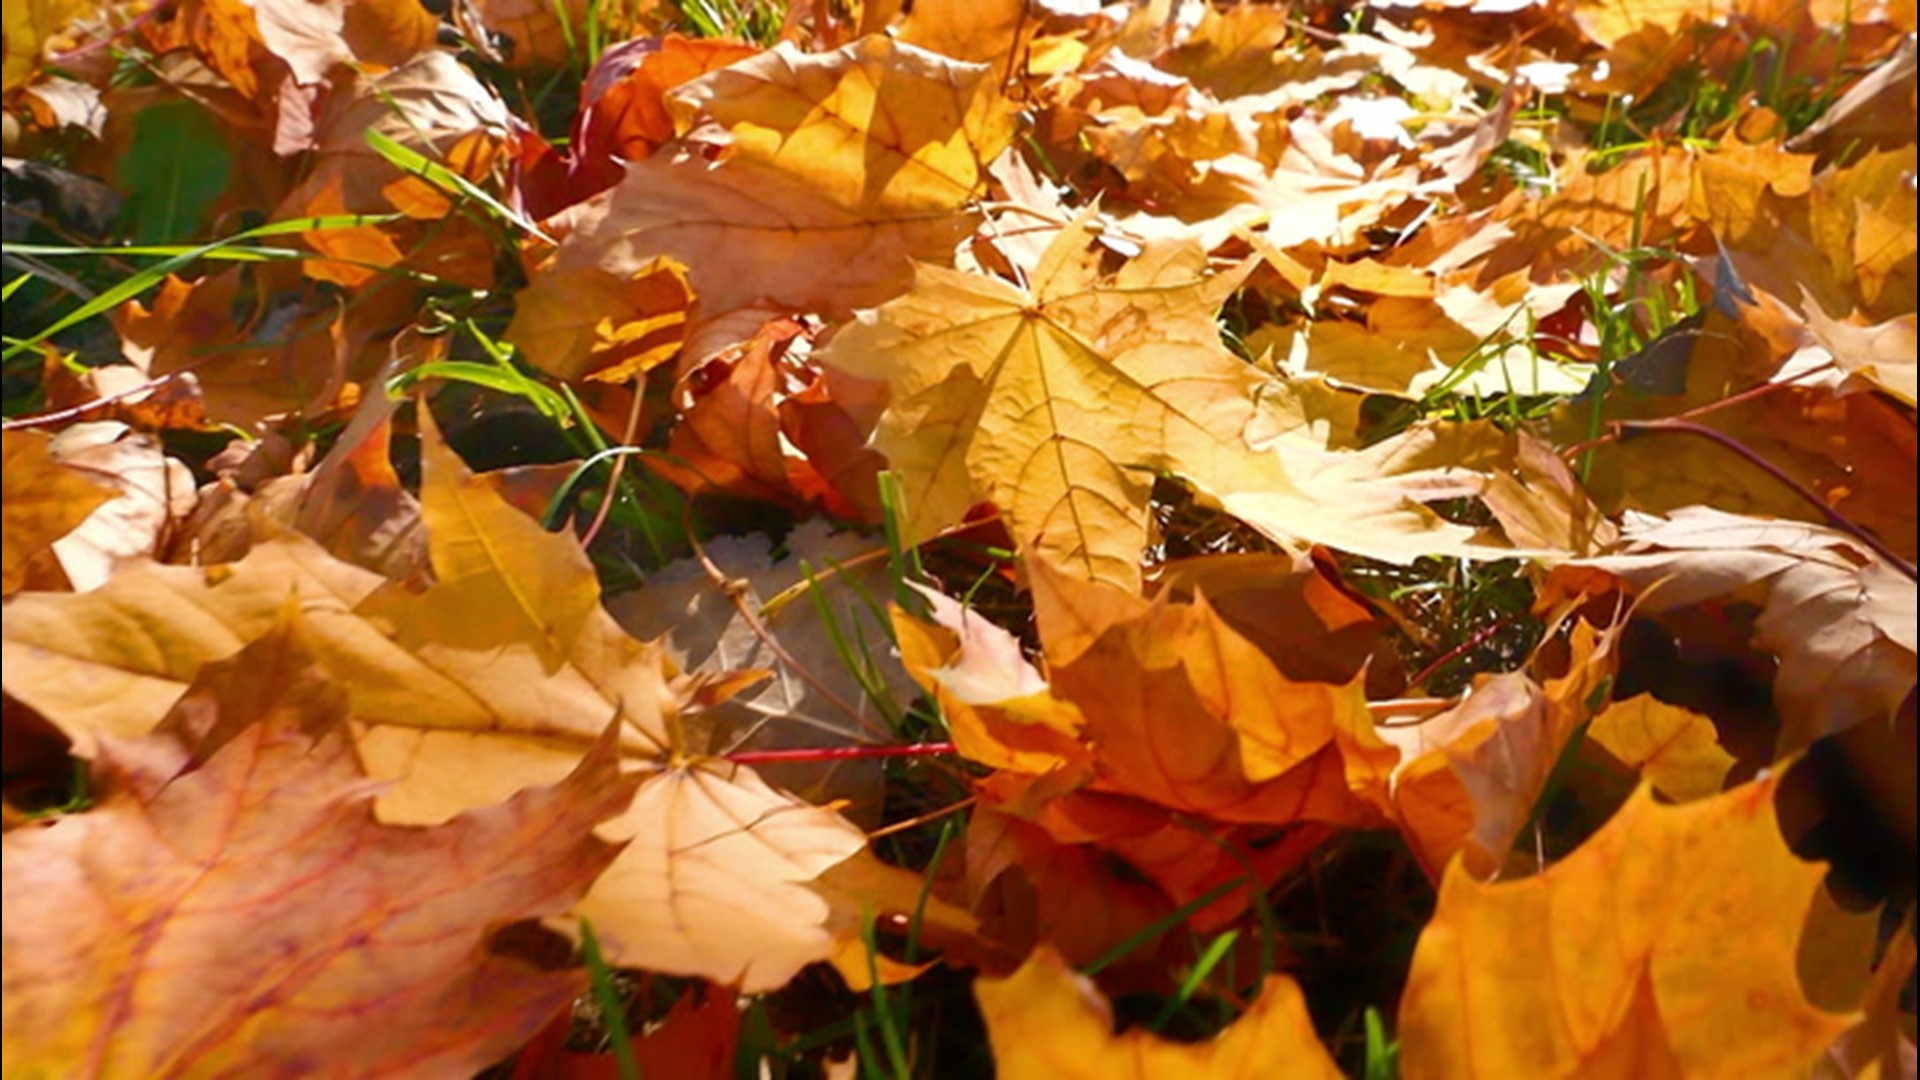 Fall leaves are breathtaking to look at. Learn why they change colors and what makes vibrant fall foliage possible.